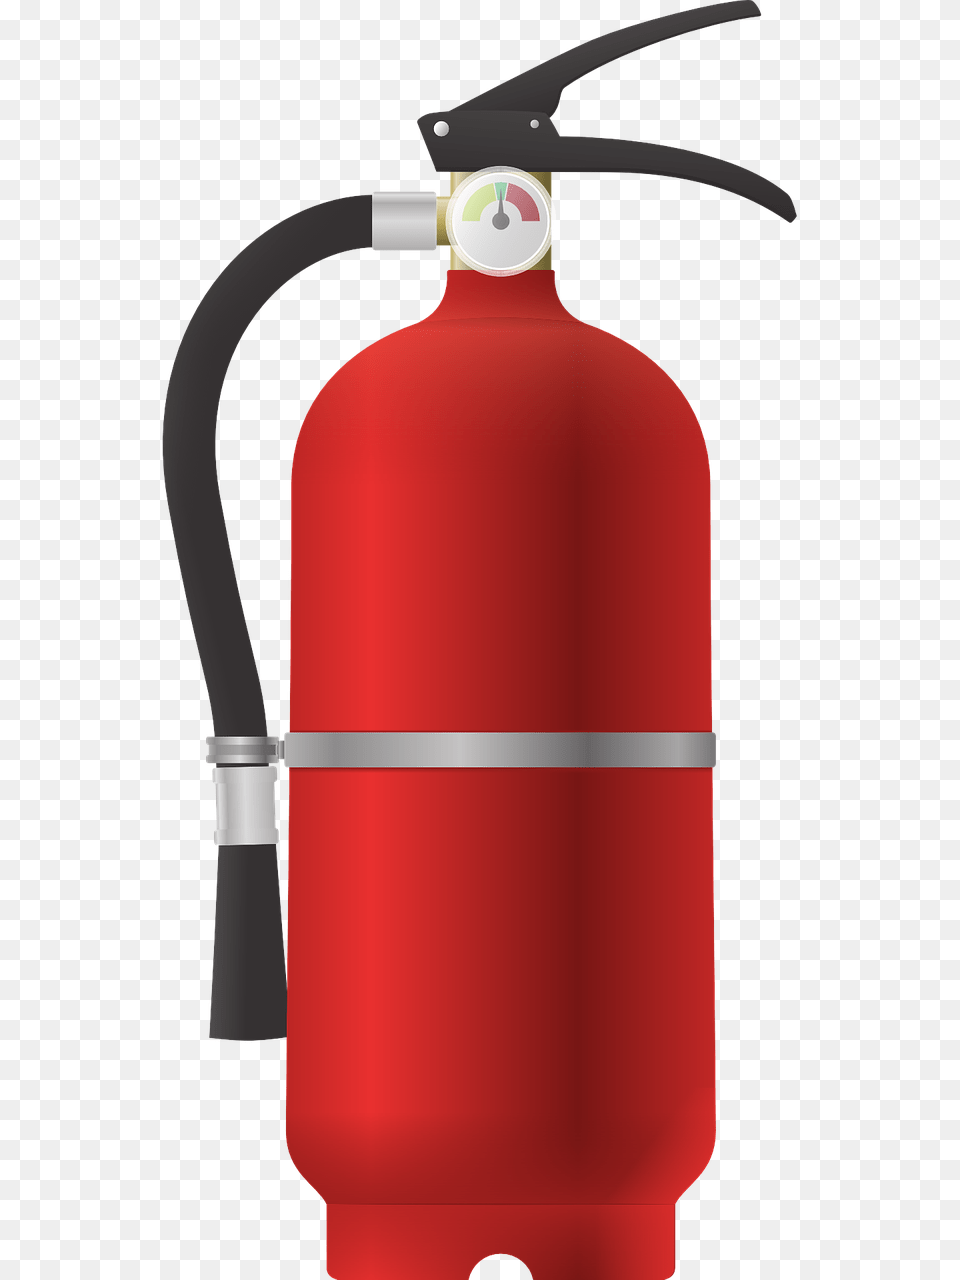 Collection Of Fire Extinguisher Images Clipart High Fire Extinguisher Clipart, Cylinder, Gas Pump, Machine, Pump Free Png